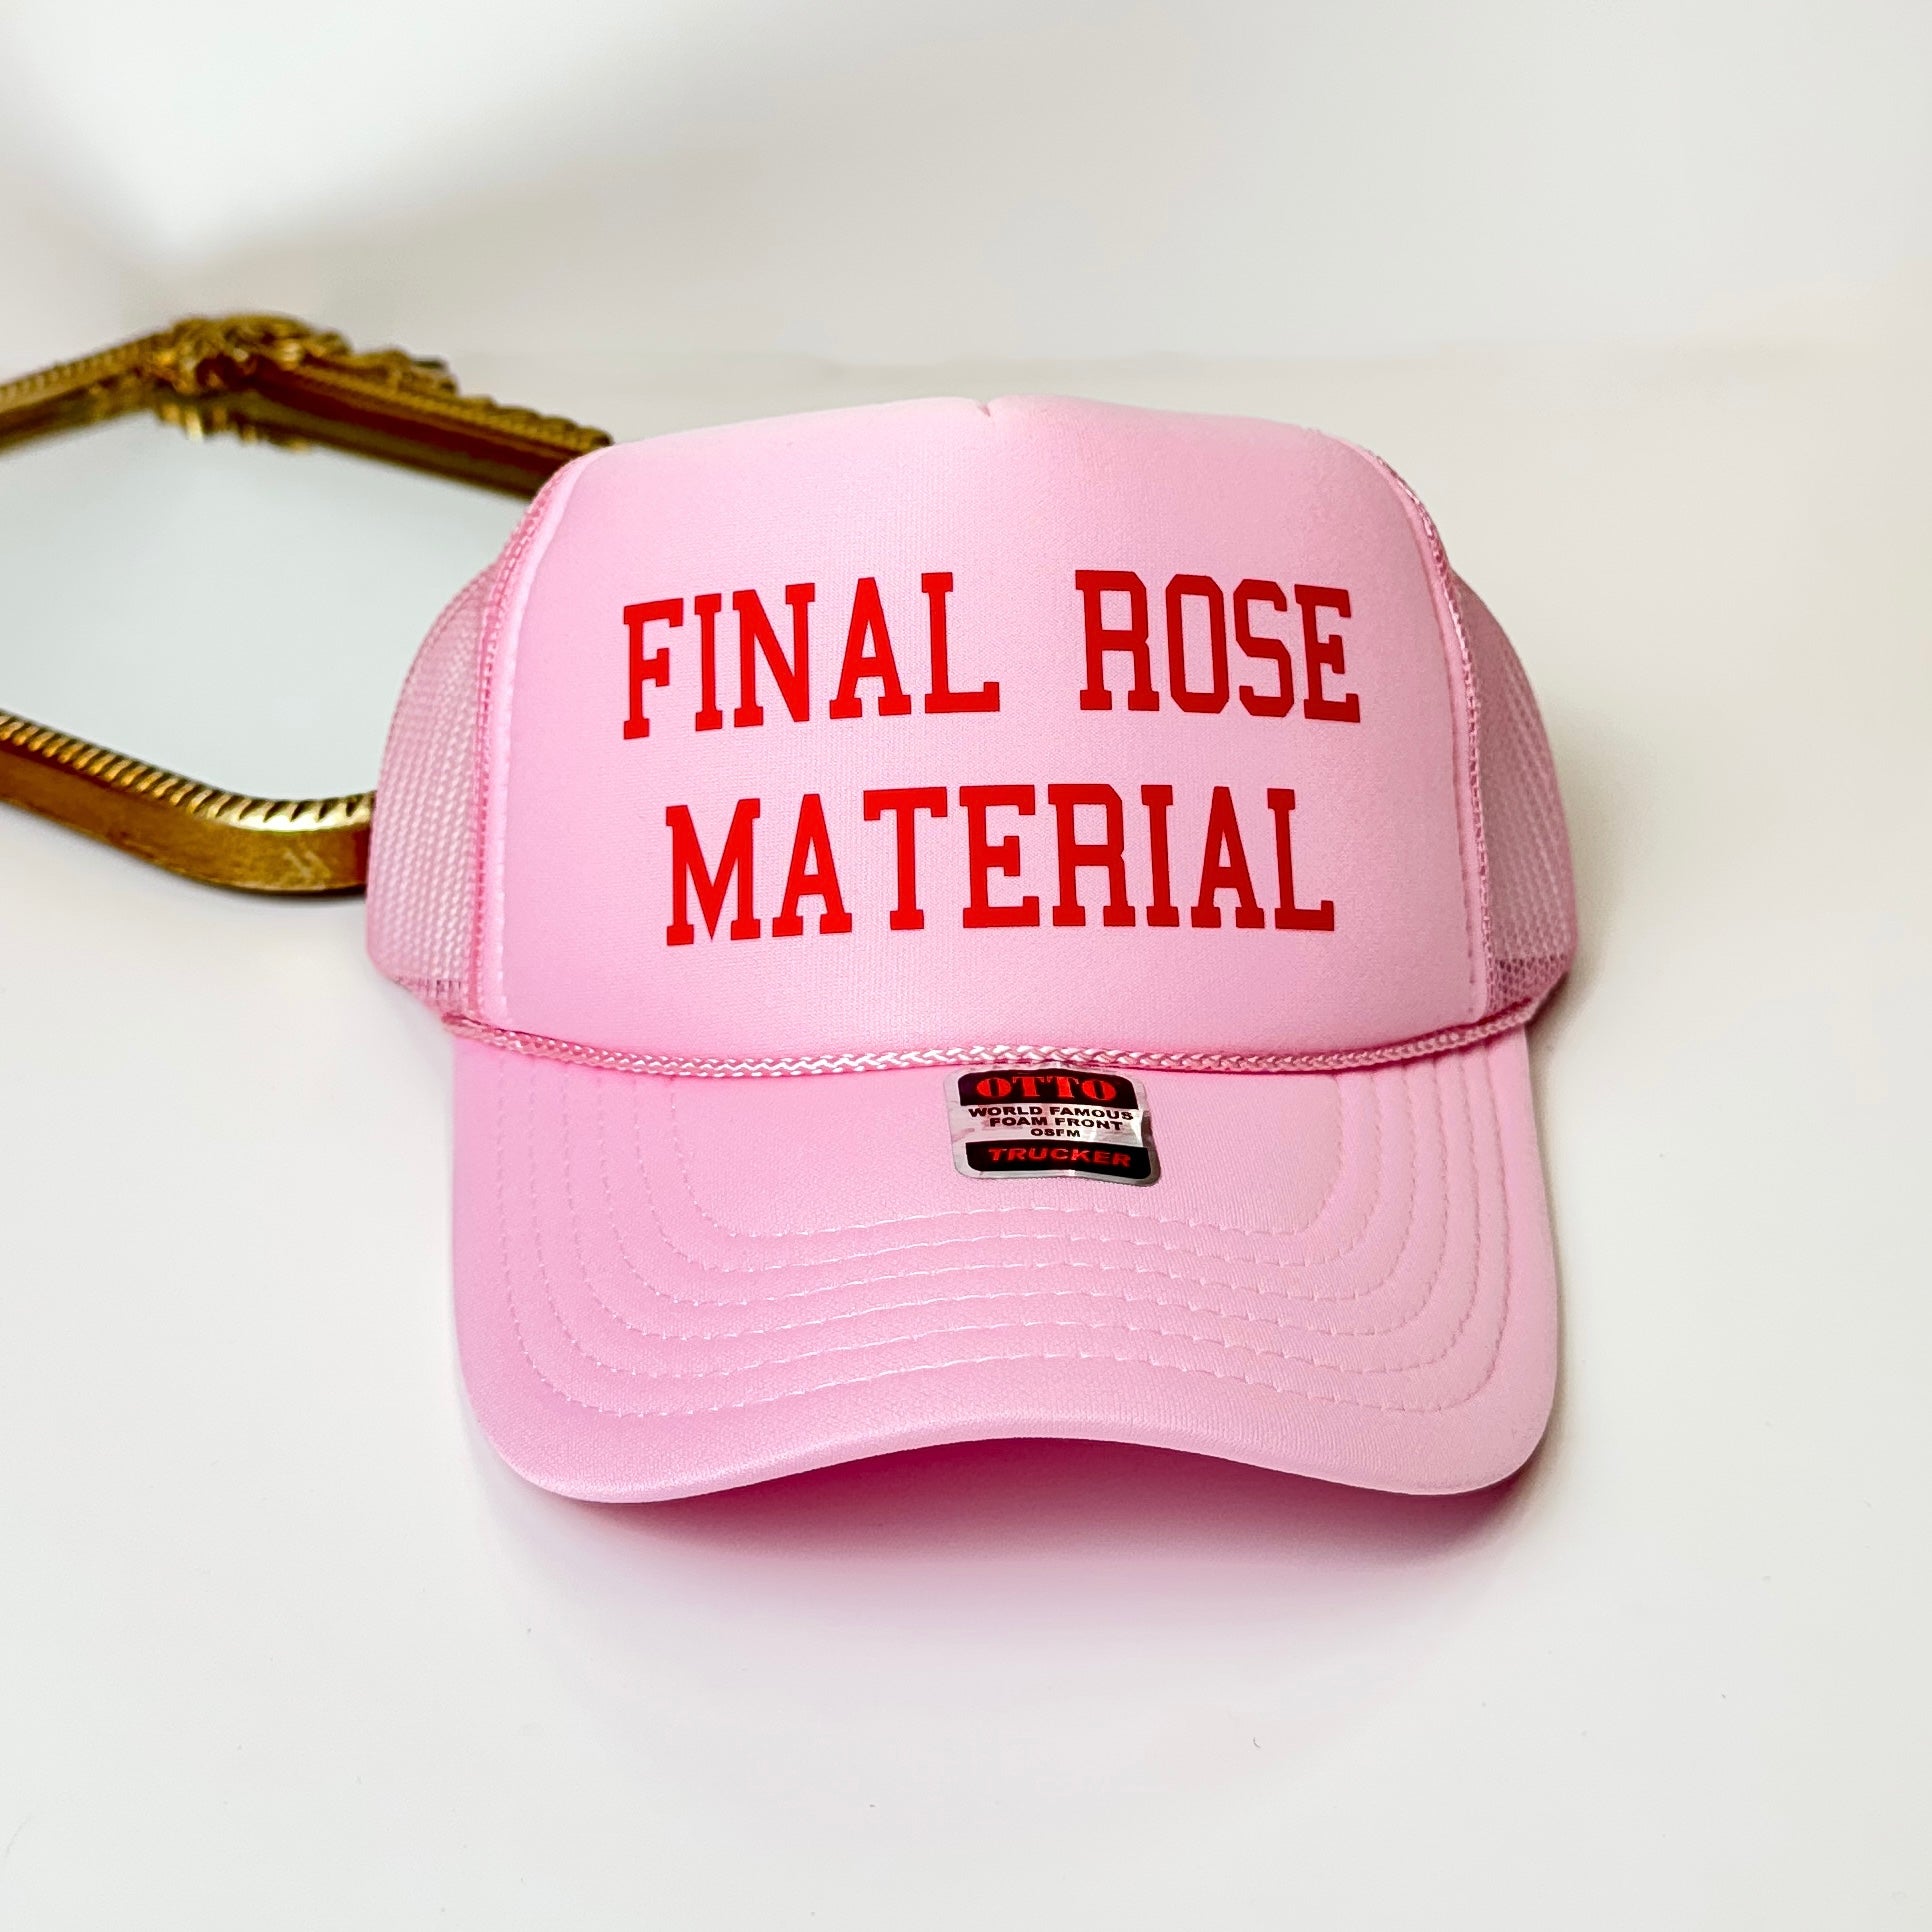 Final Rose Material Foam Trucker Hat in Light Pink - Giddy Up Glamour Boutique